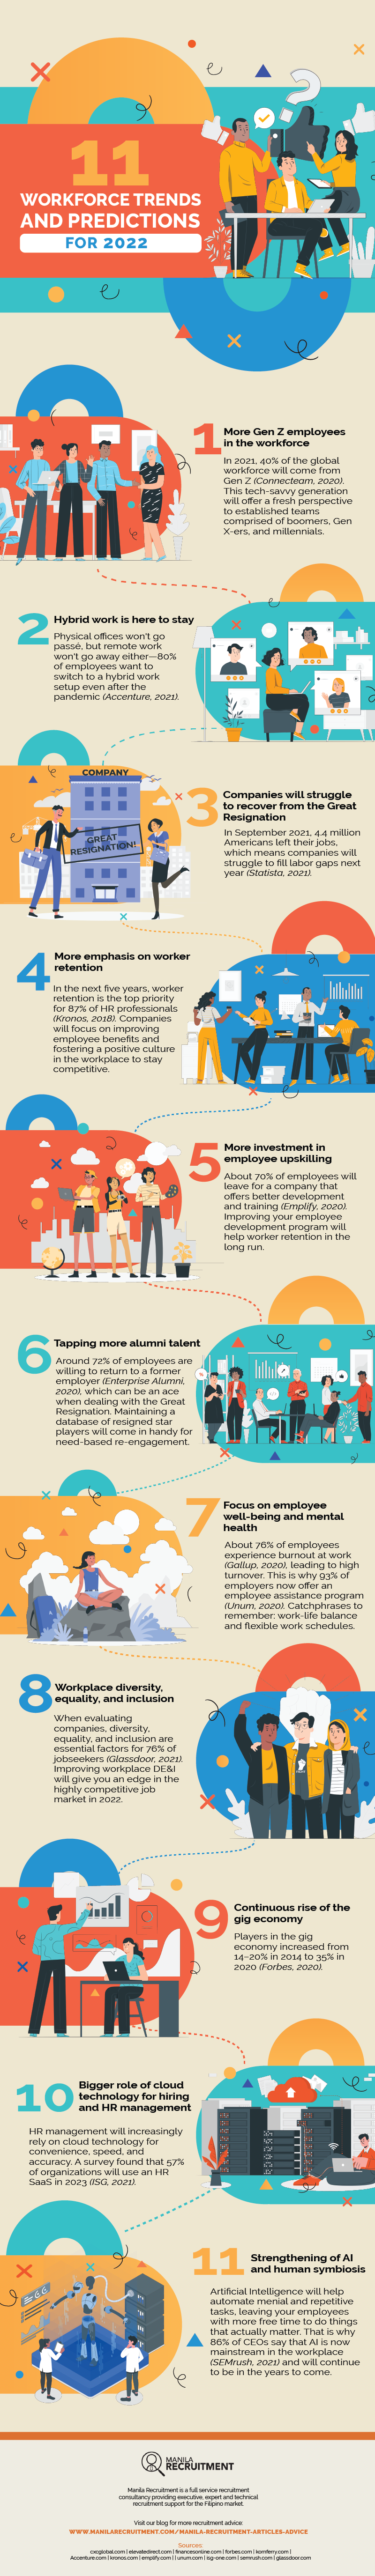 Workforce trends and predictions 2022 infographic